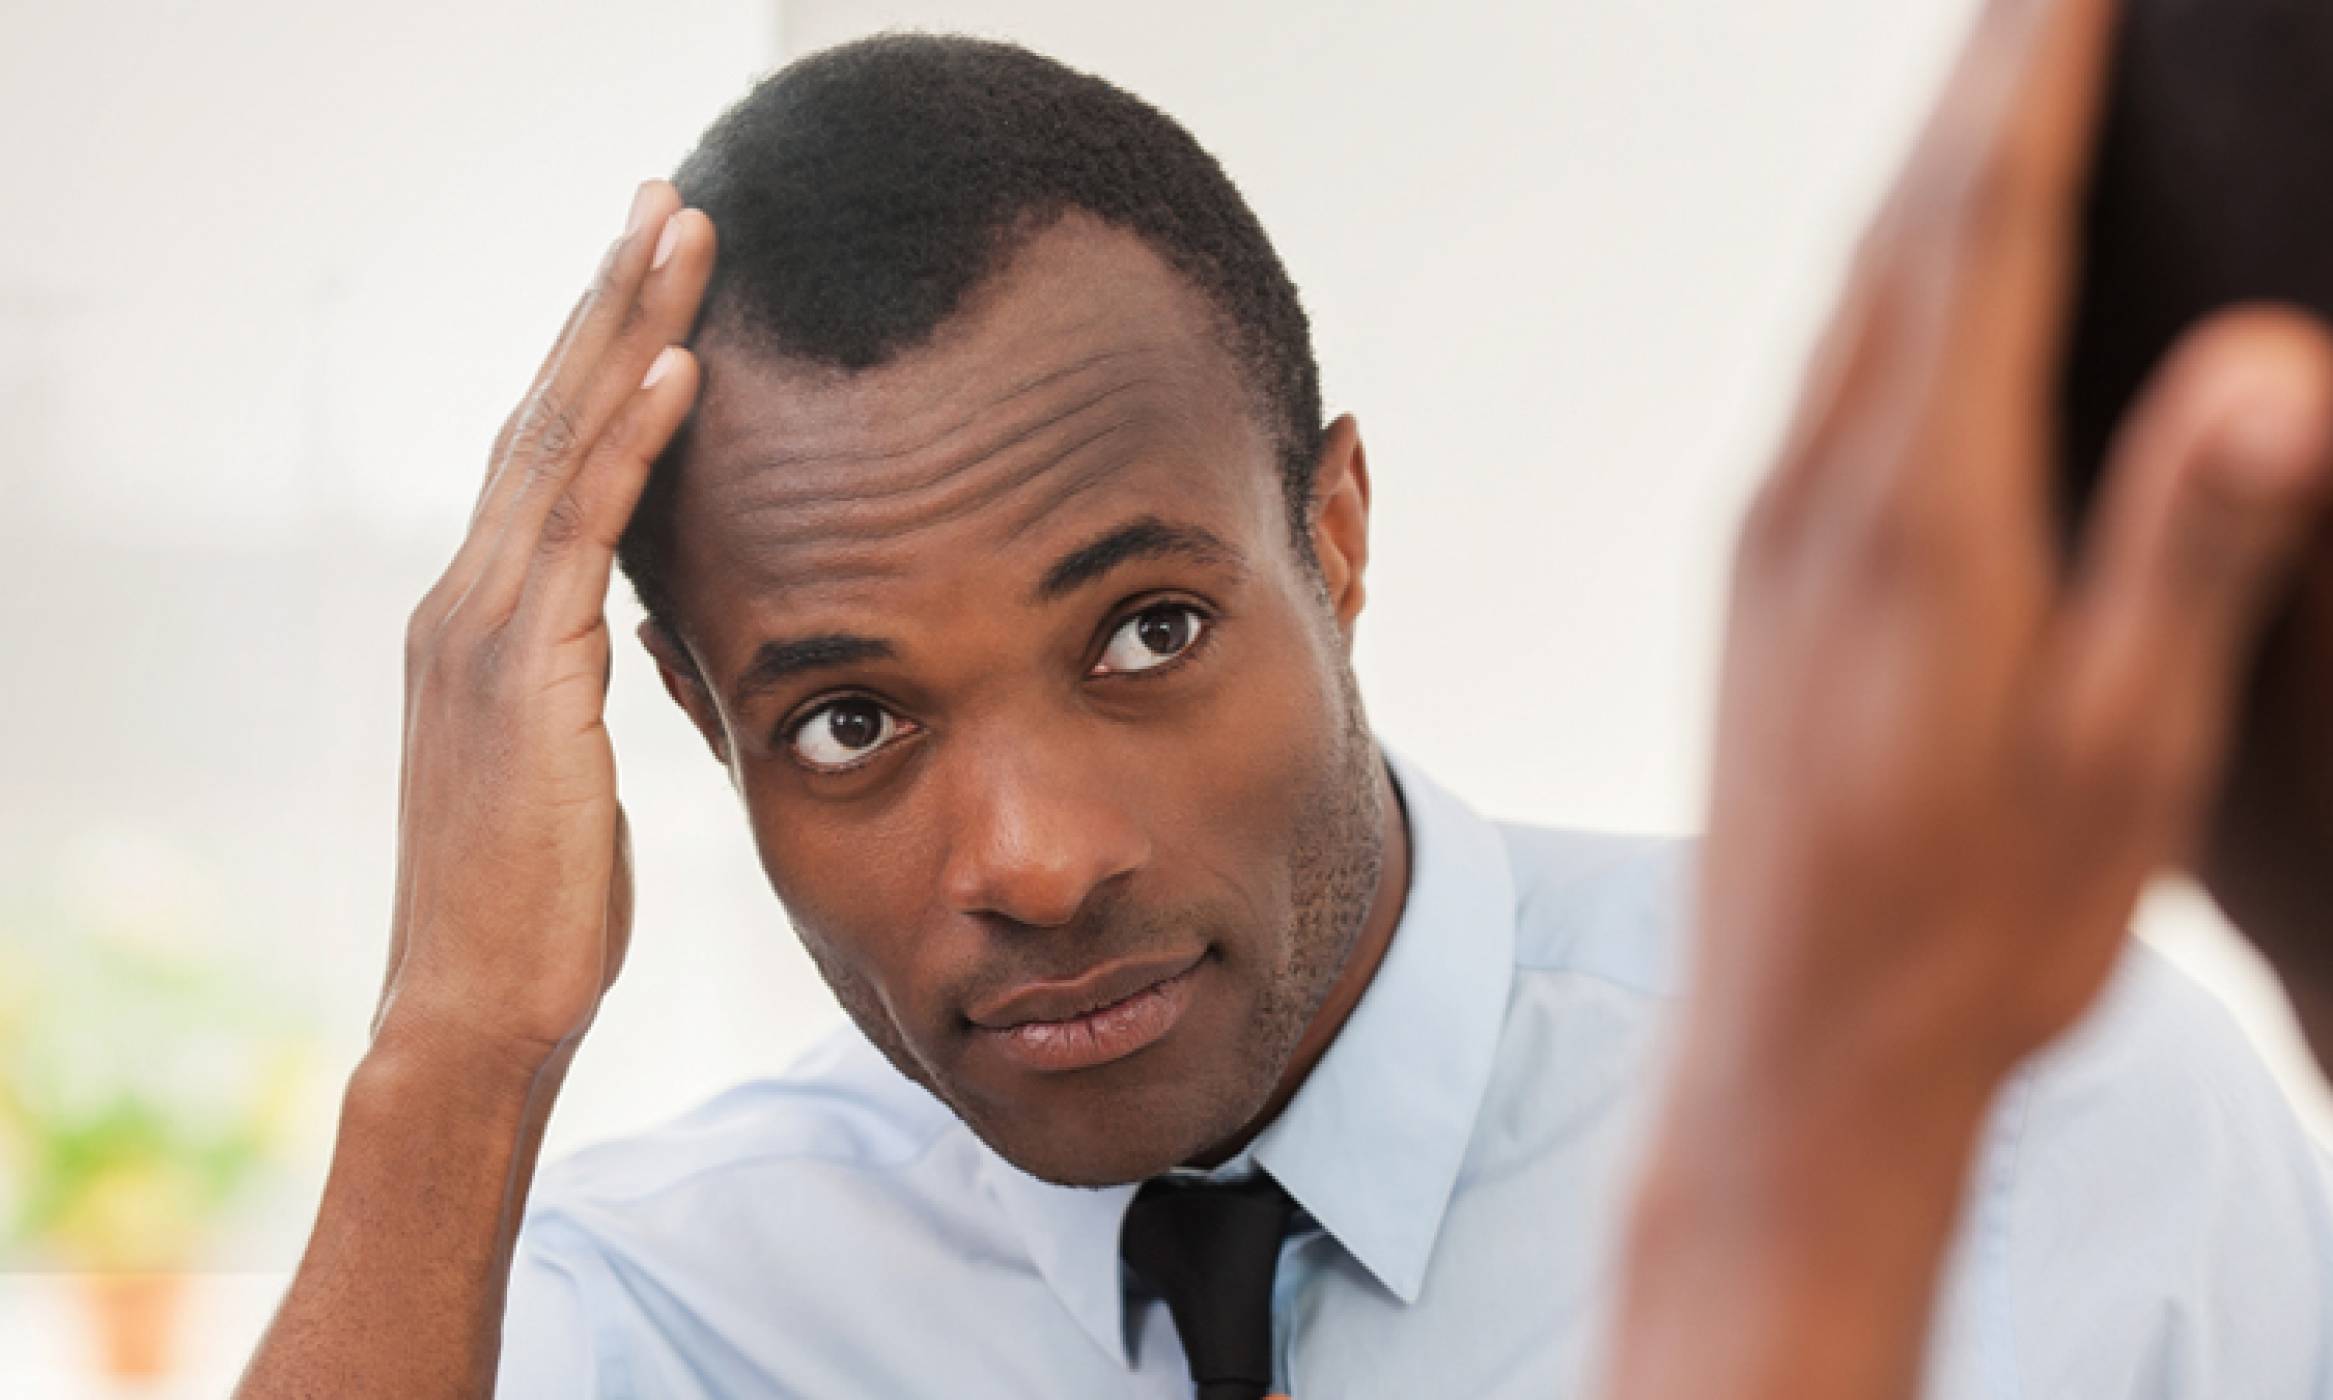 A handsome black man looks at his reflection in the mirror as he touches his scalp. He has short hair with a receding hairline.